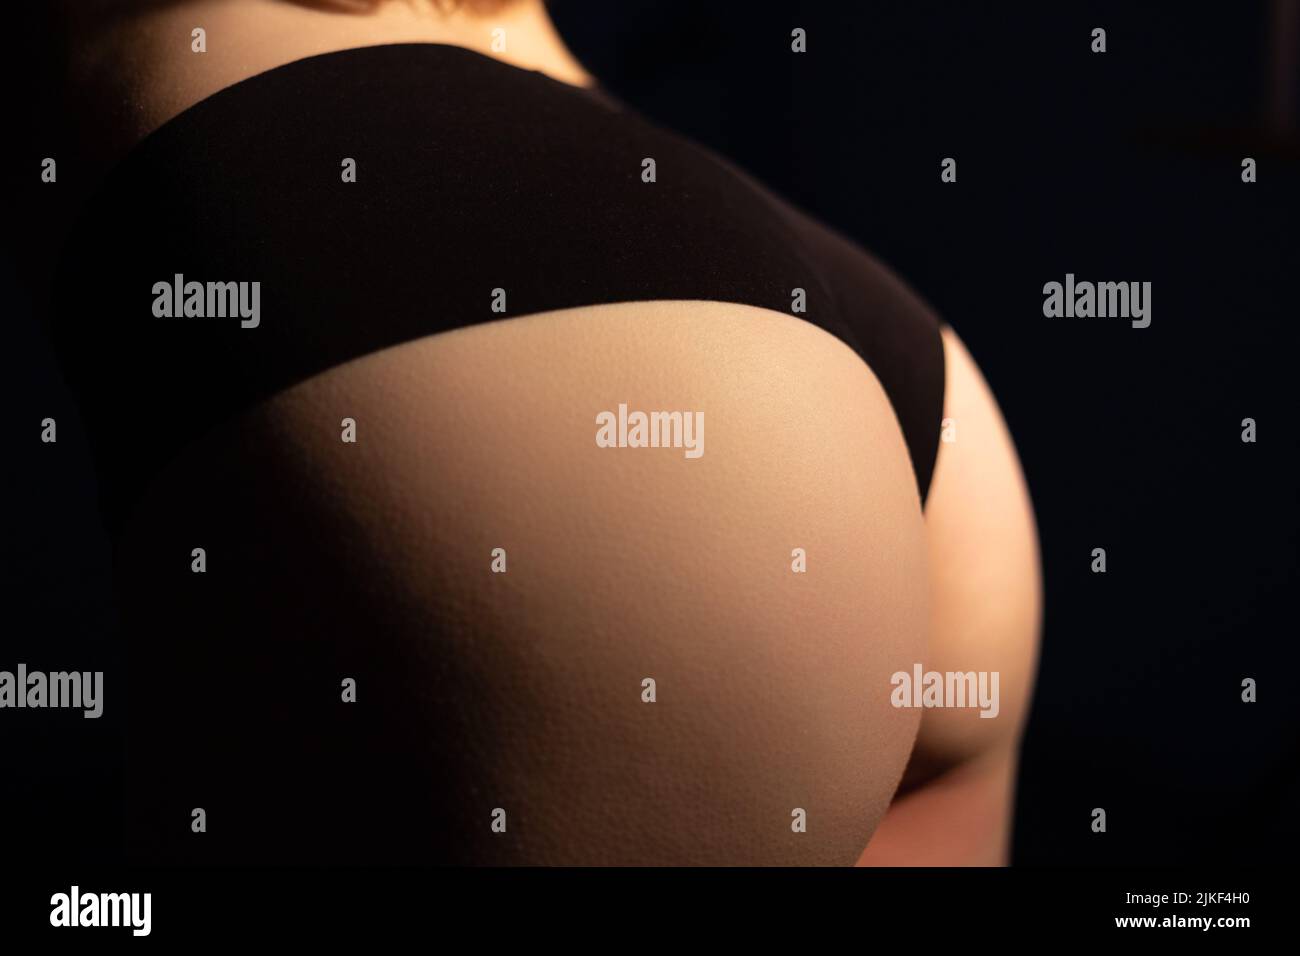 Photo of woman hips wearing black lingerie in shadow Stock Photo